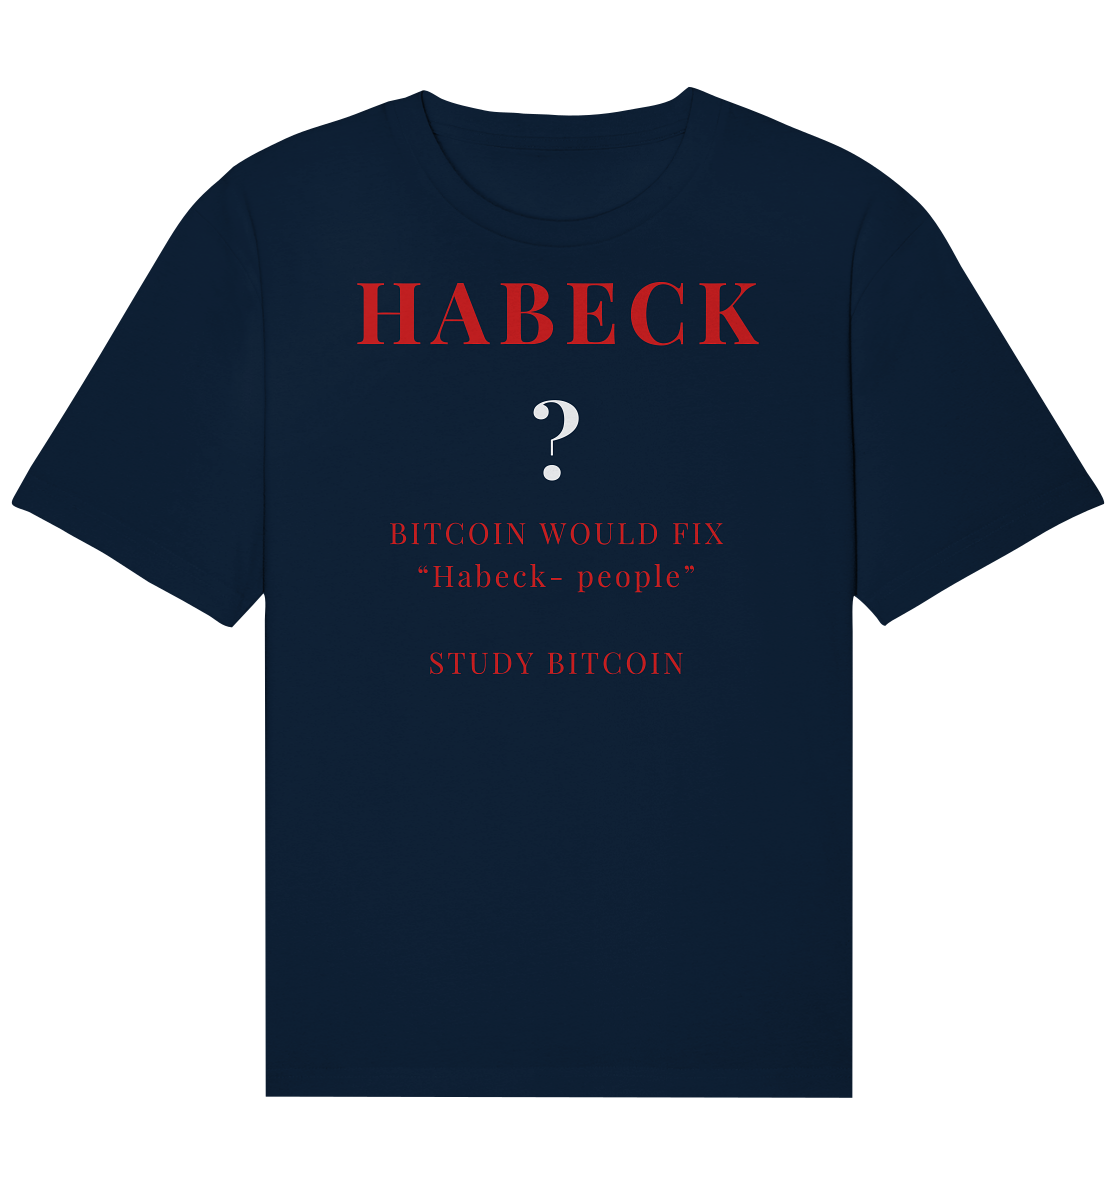 HABECK ? BITCOIN WOULD FIX "Habeck people" - STUDY BITCOIN  - Organic Relaxed Shirt